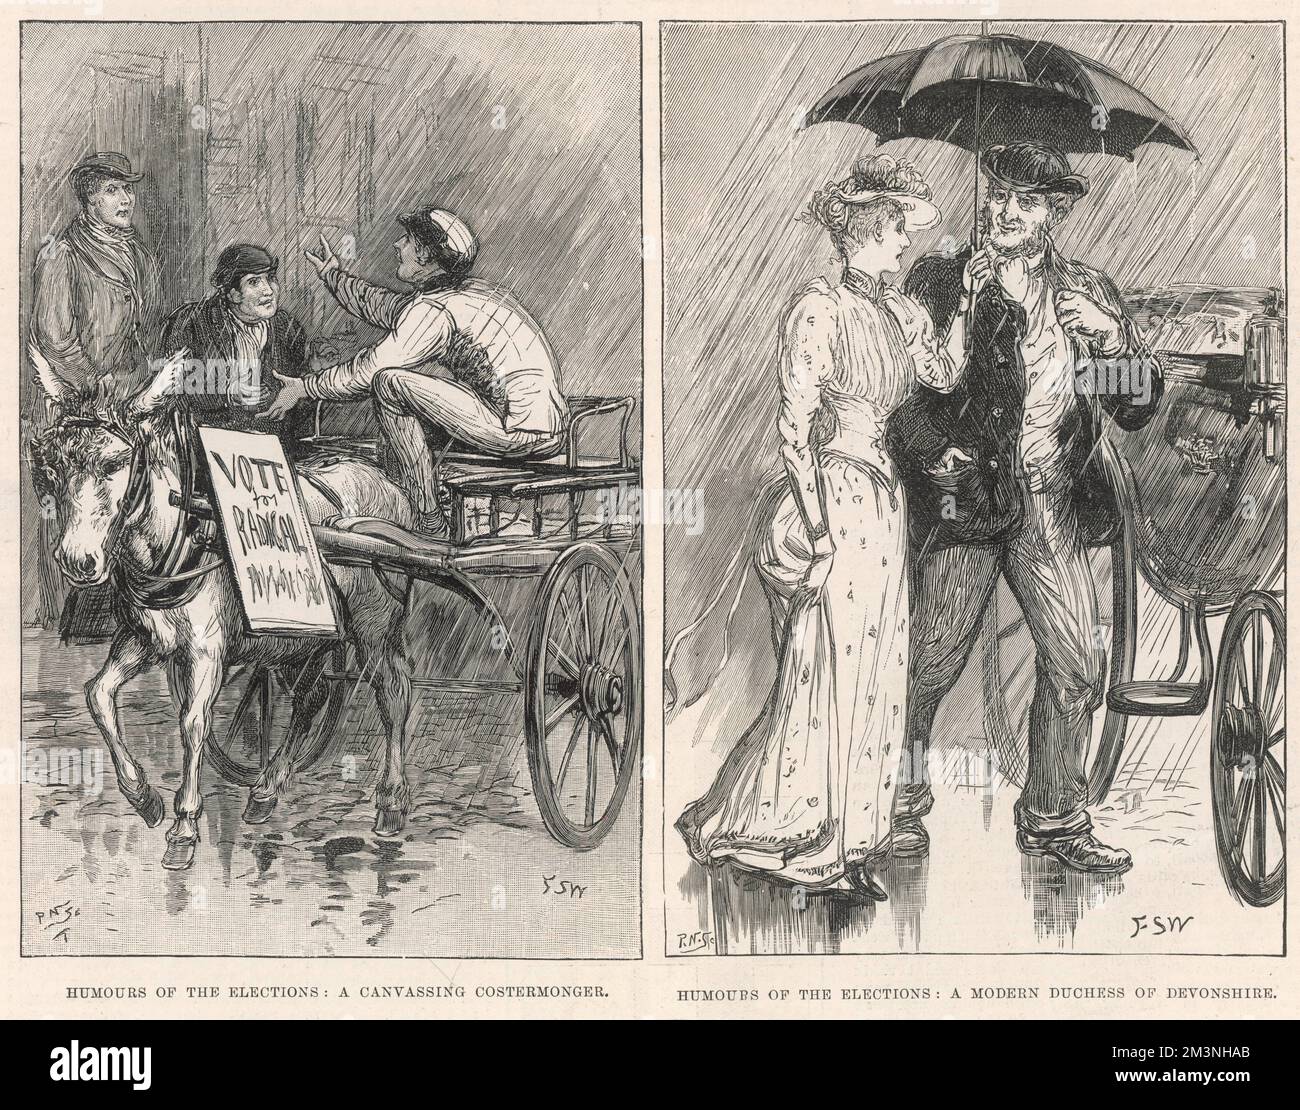 Two sketches showing humours of the 1892 election showing a canvassing costermonger in one picture and a modern Duchess of Devonshire in another (the 18th century Duchess was a well-known canvasser for Charles James Fox).     Date: 1892 Stock Photo